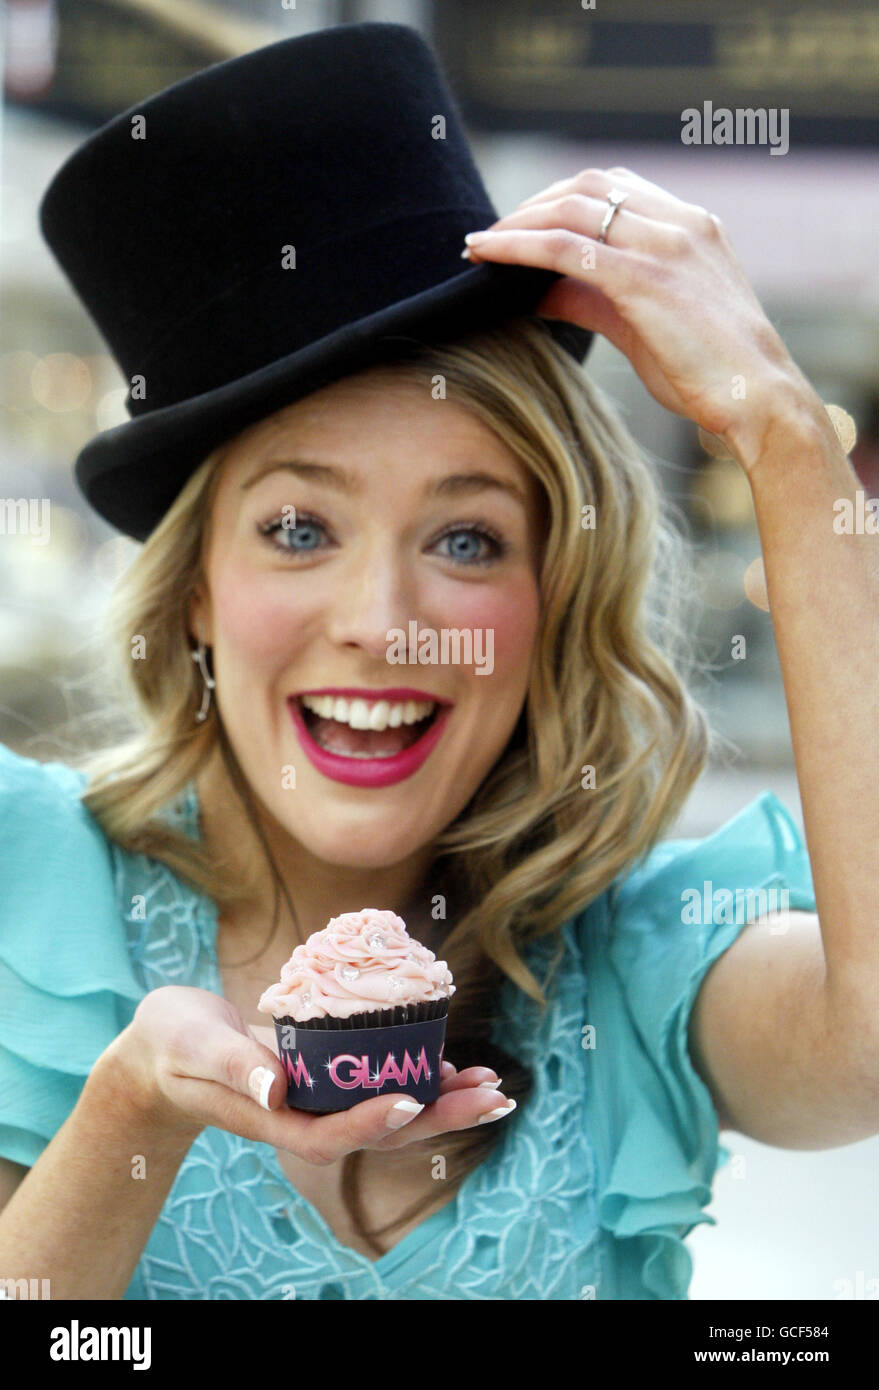 100,000 during a photocall at Rox in Glasgow to promote female consumer event Glam. Stock Photo